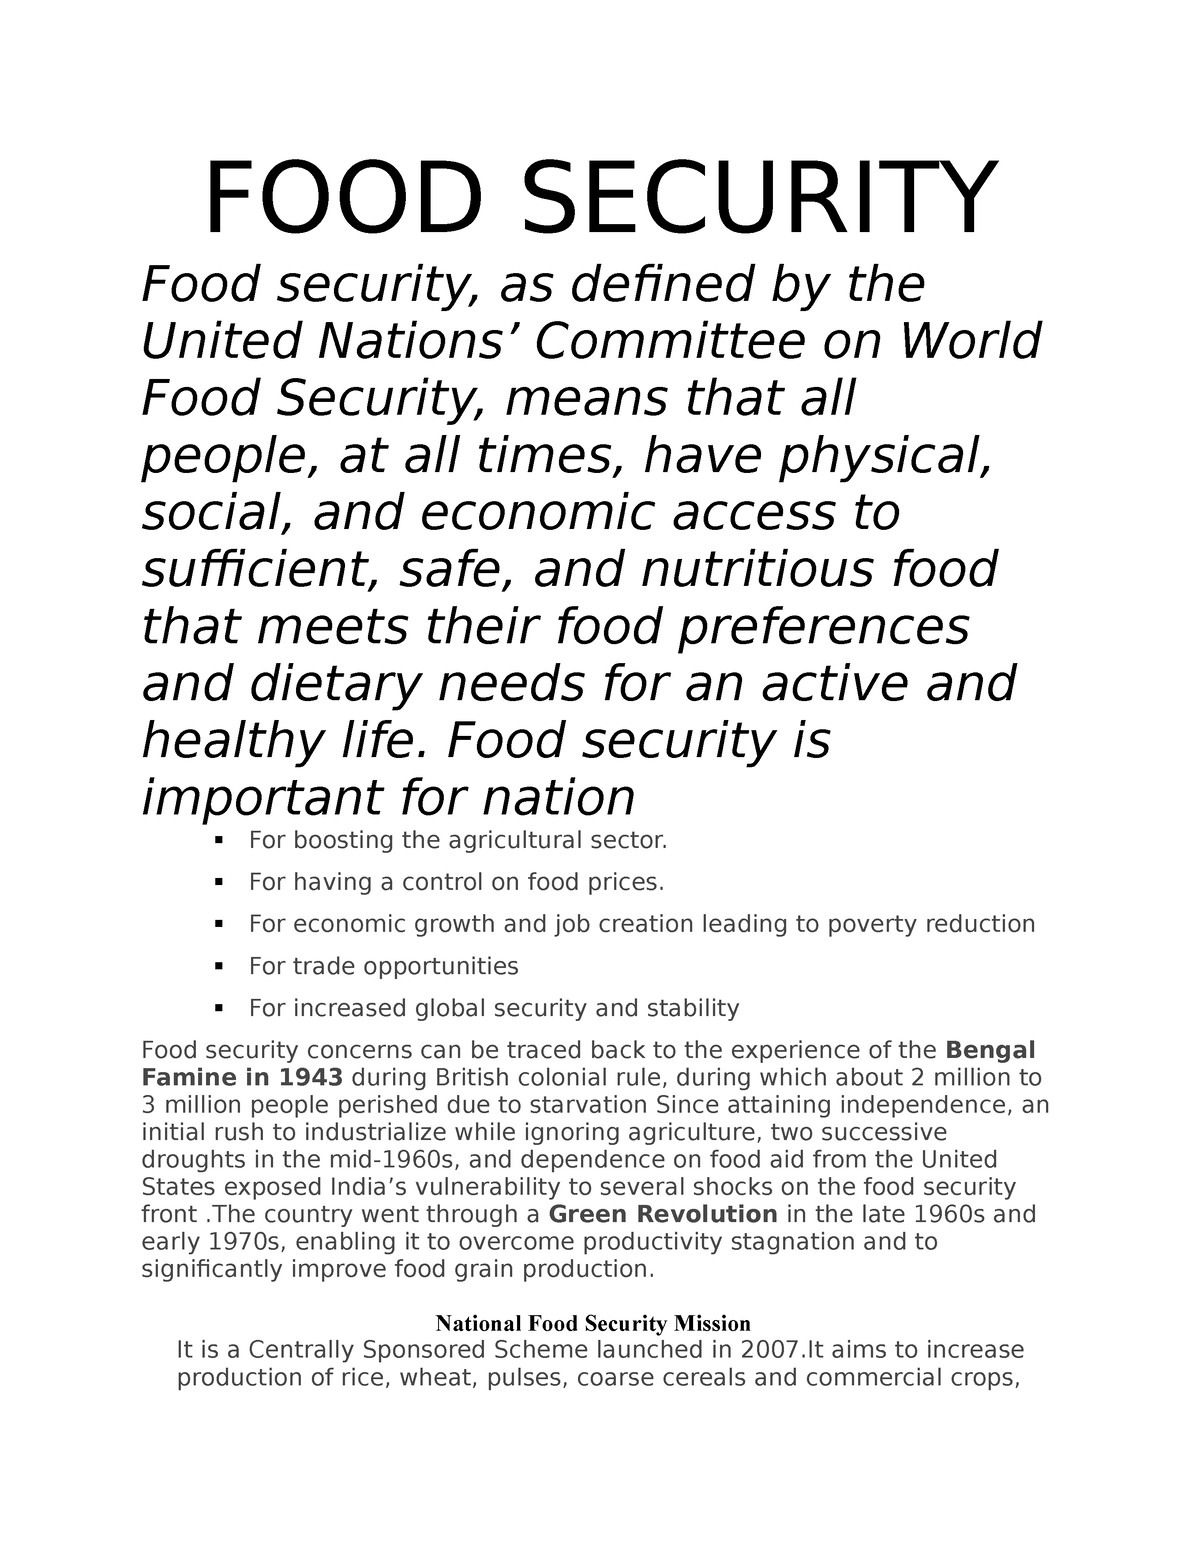 dissertations on food security